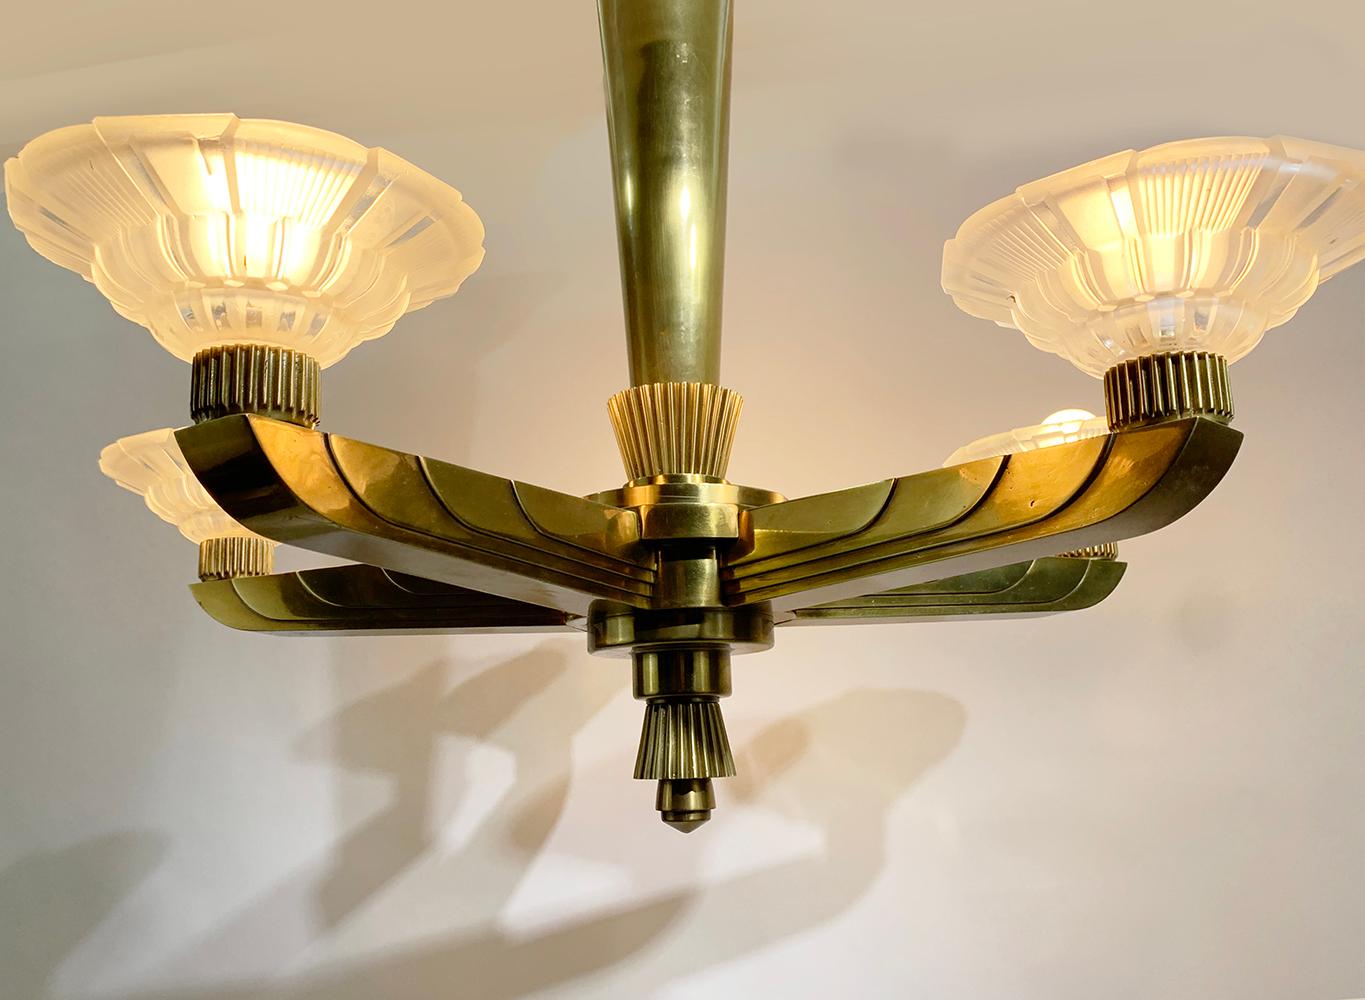 A stunning French art deco chandelier by Hettier et Vincent, circa 1930.
The fixture holds five uplight rare cups in moulded-pressed glass signed Hettier & Vincent, France with its art deco geometric shape bronze structure.
 